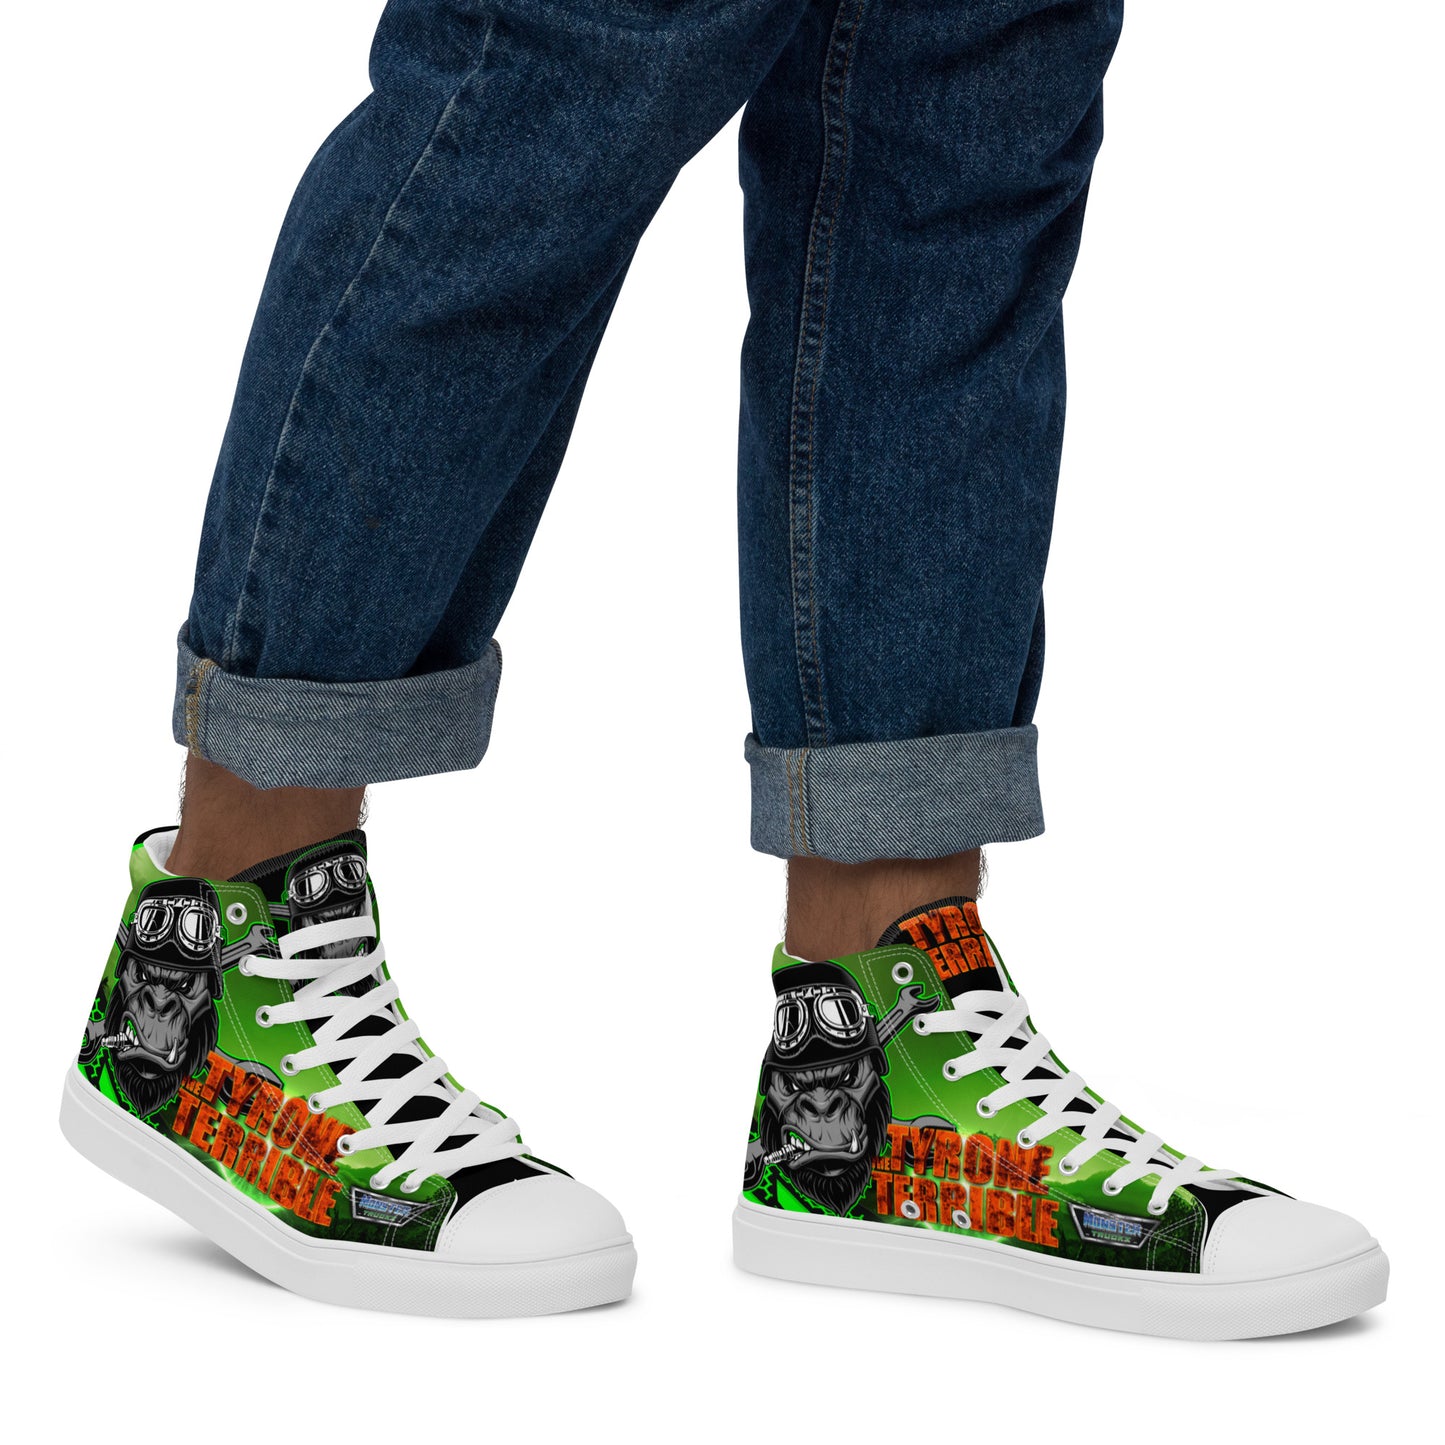 Tyrone The Terrible Men’s high top canvas shoes